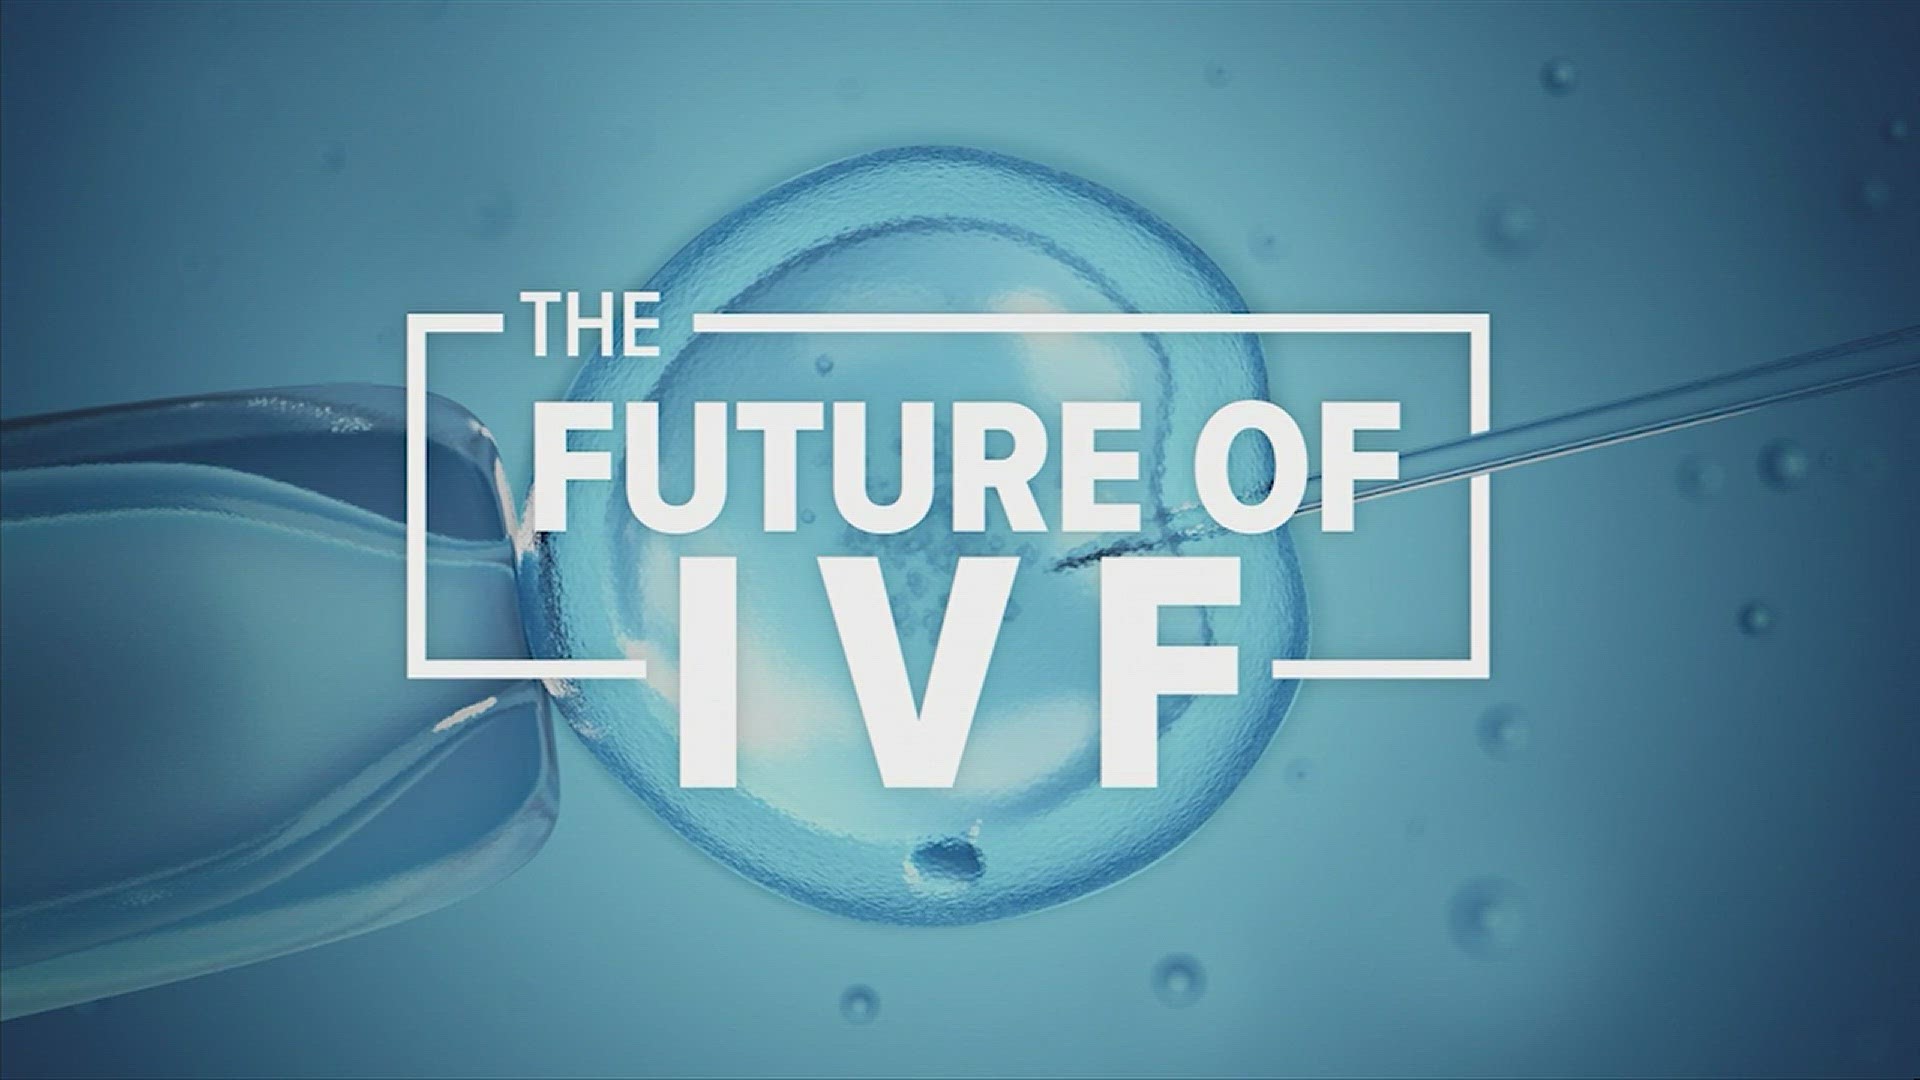 Several IVF programs have paused after the Alabama Supreme Court ruled frozen embryos could be considered children.